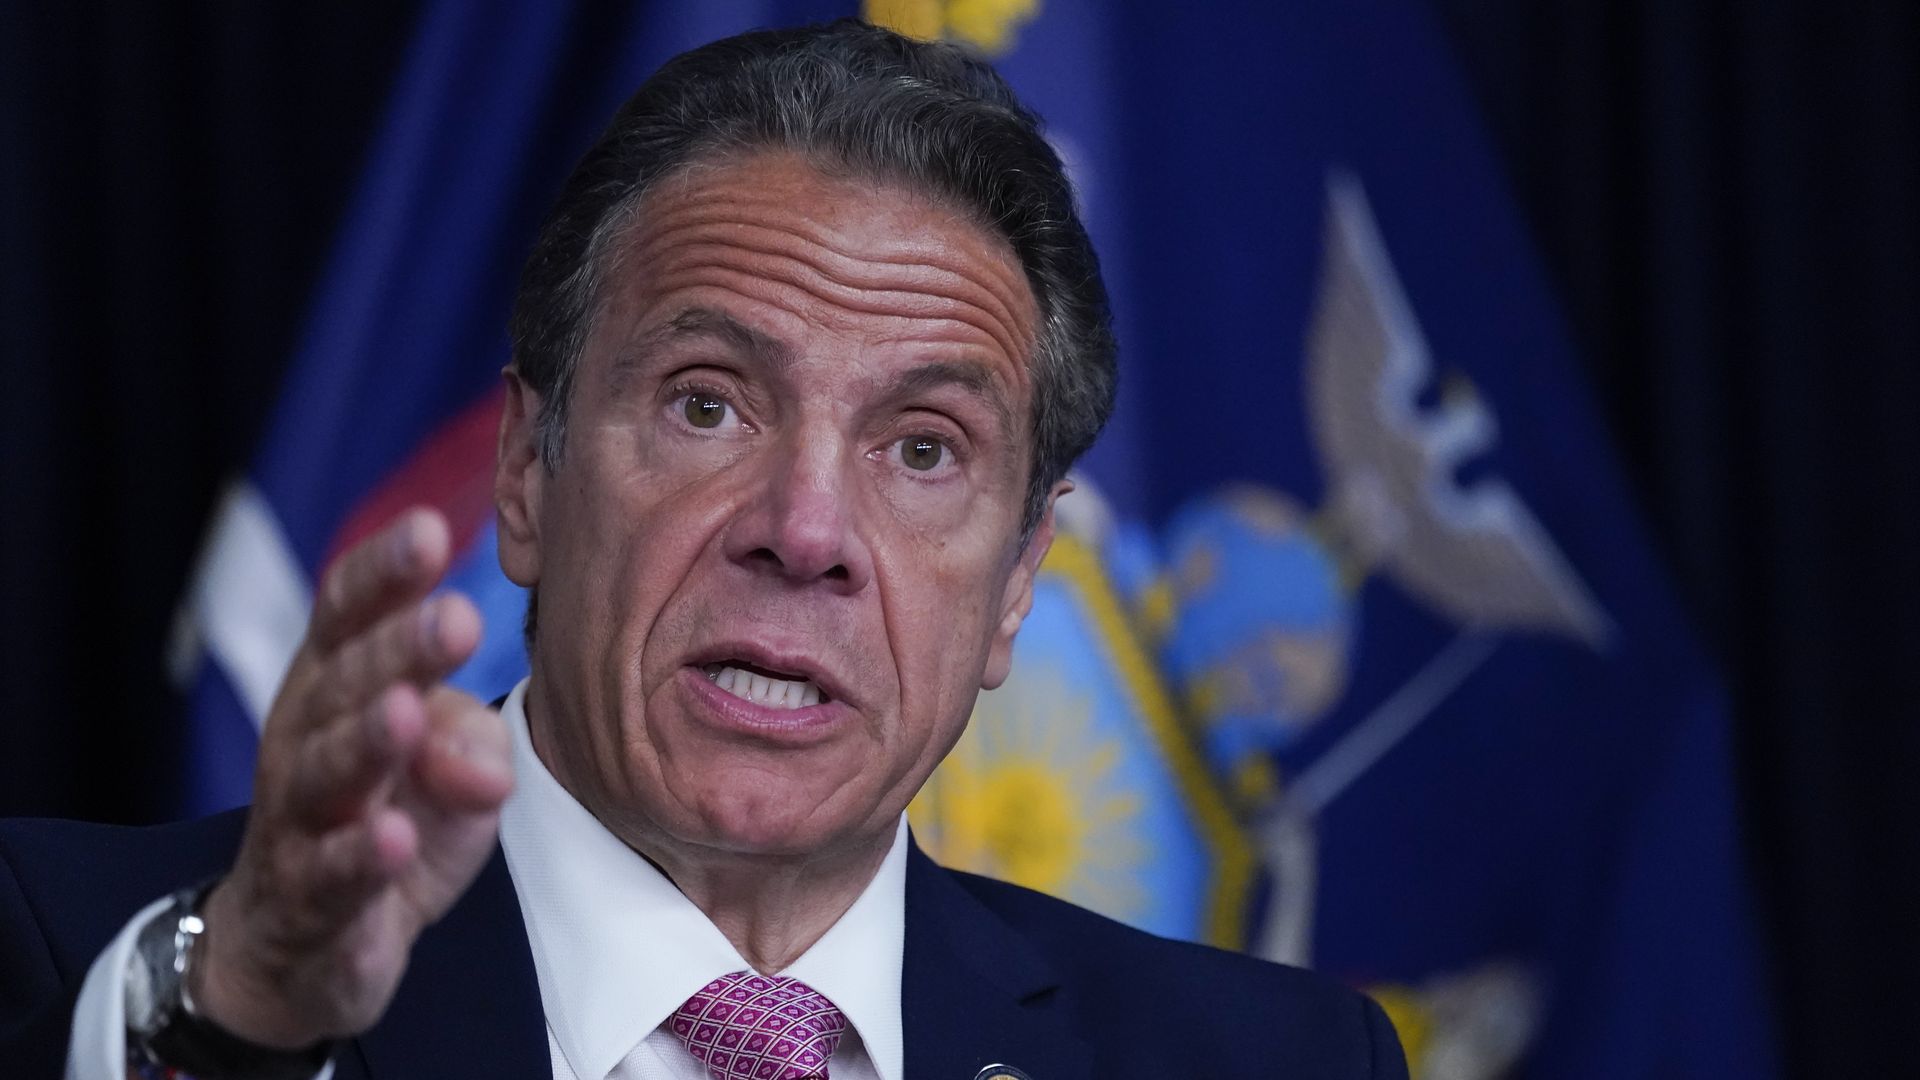 Photo of Andrew Cuomo raising his right hand while speaking